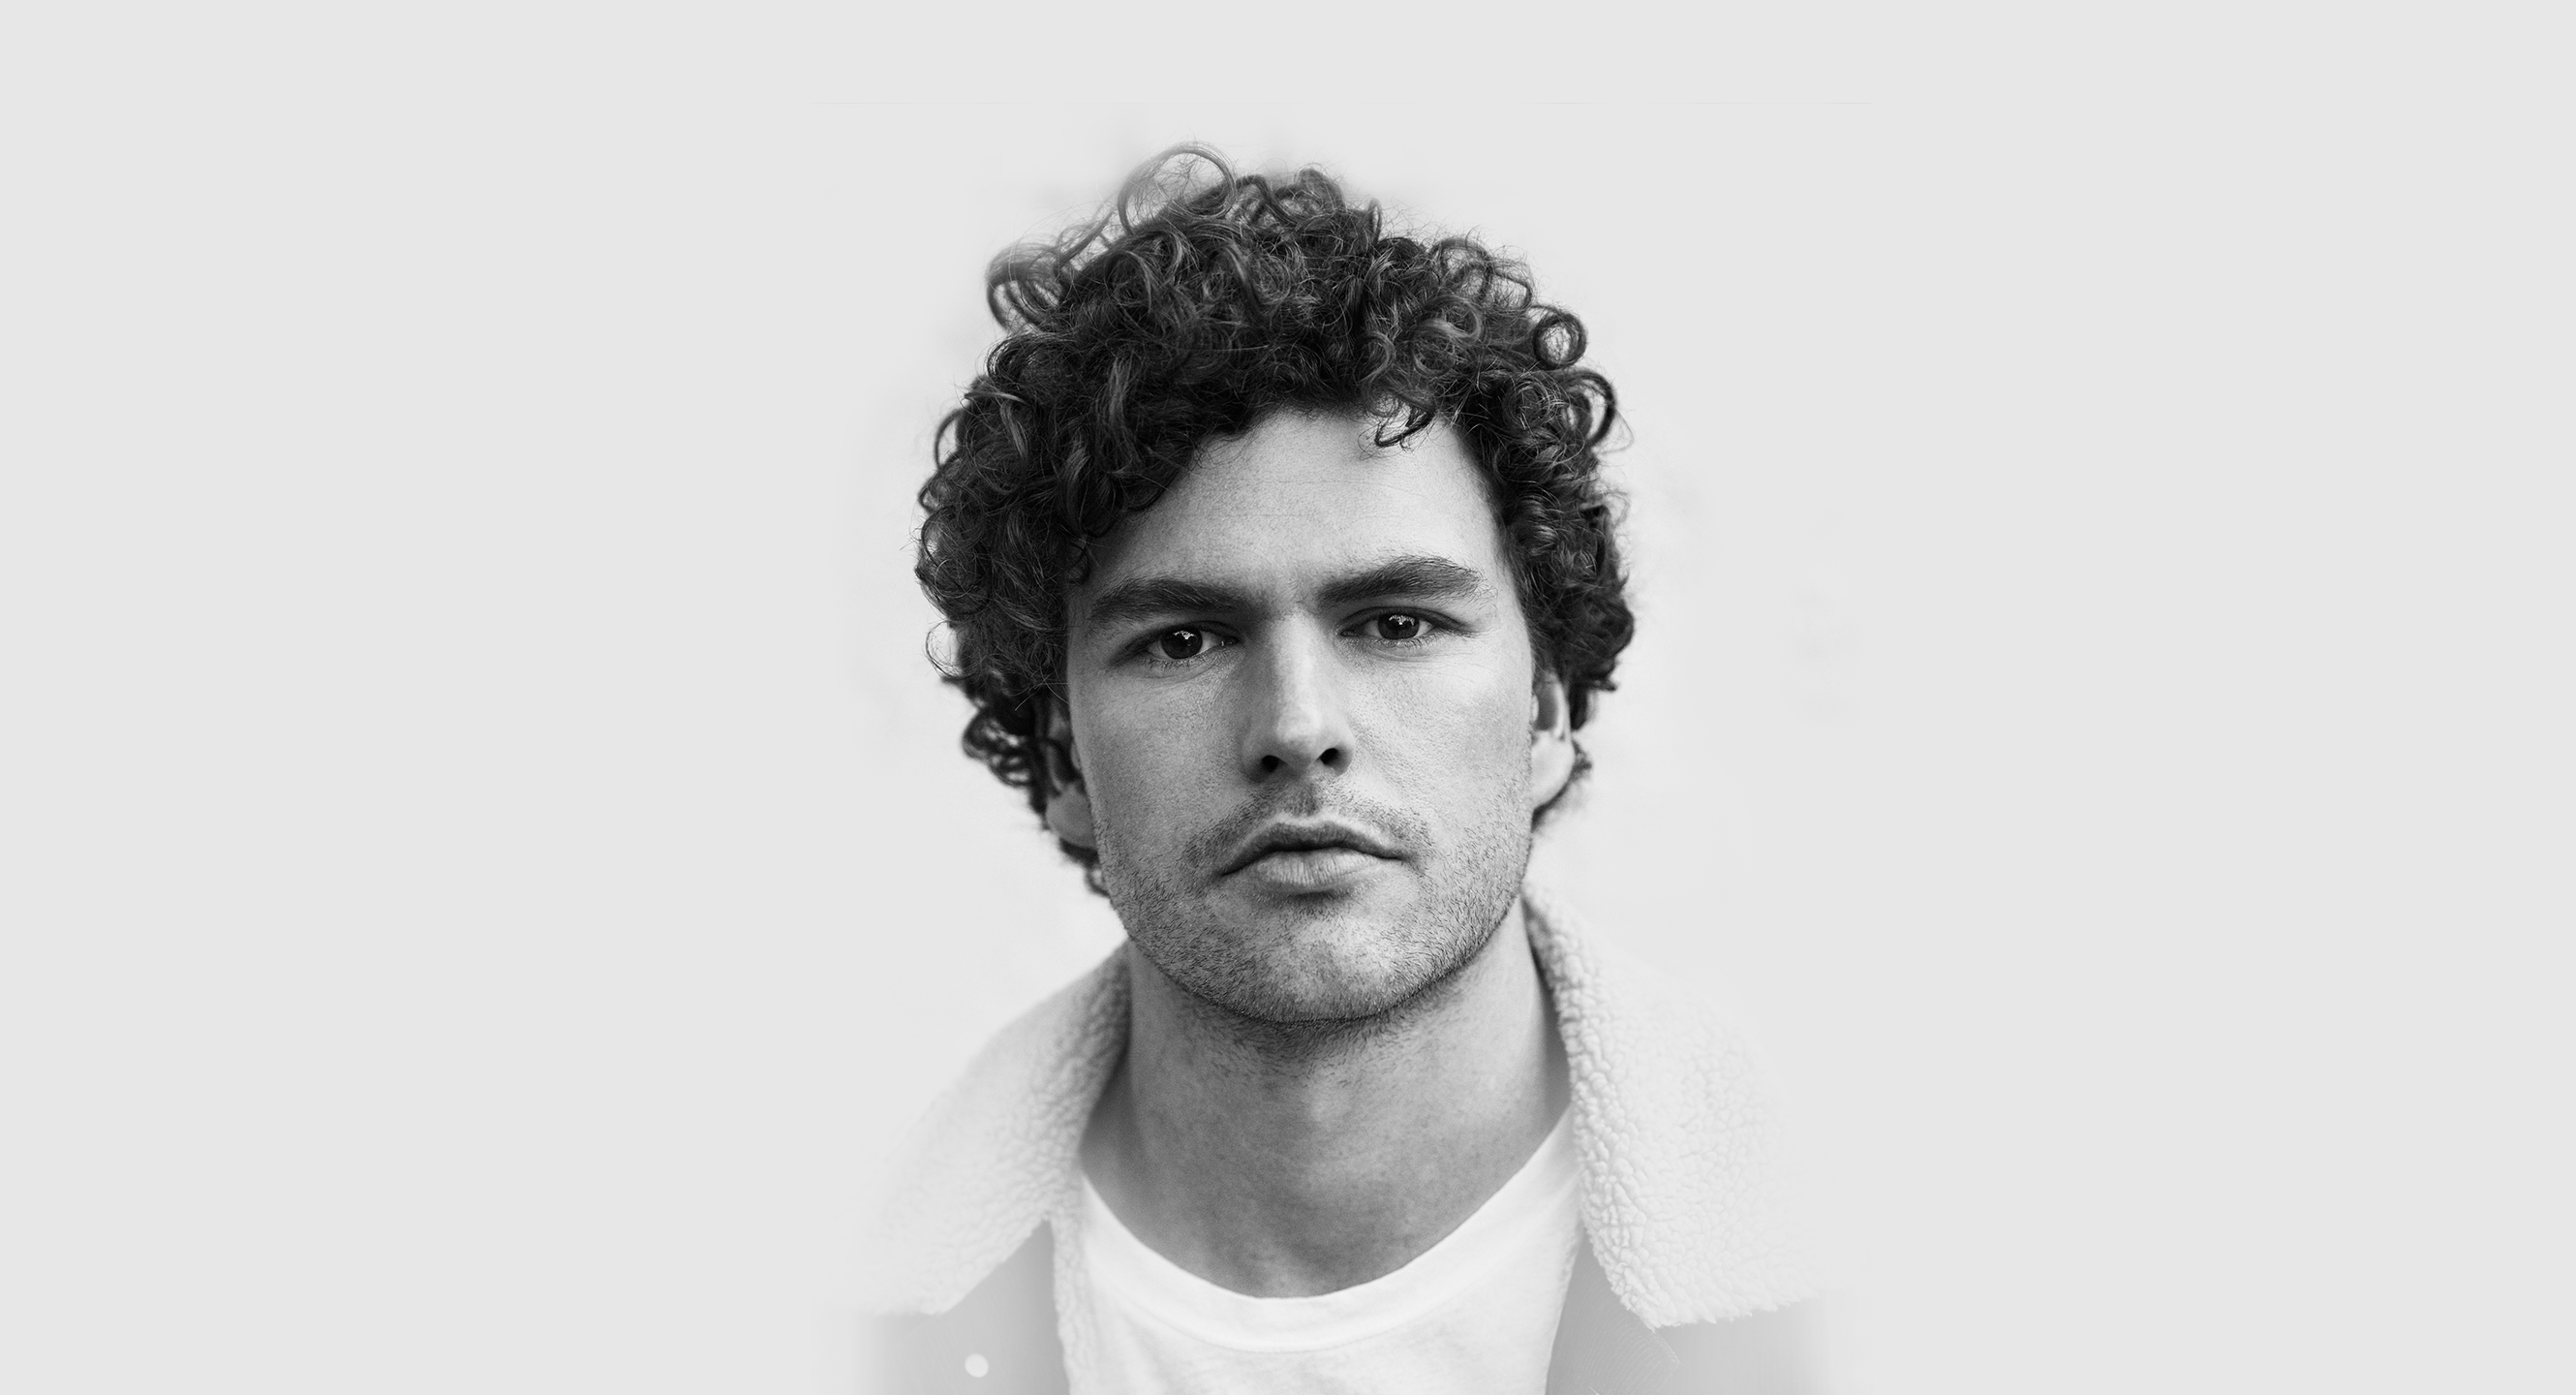 Vance Joy unveils track listing for Nation of Two album